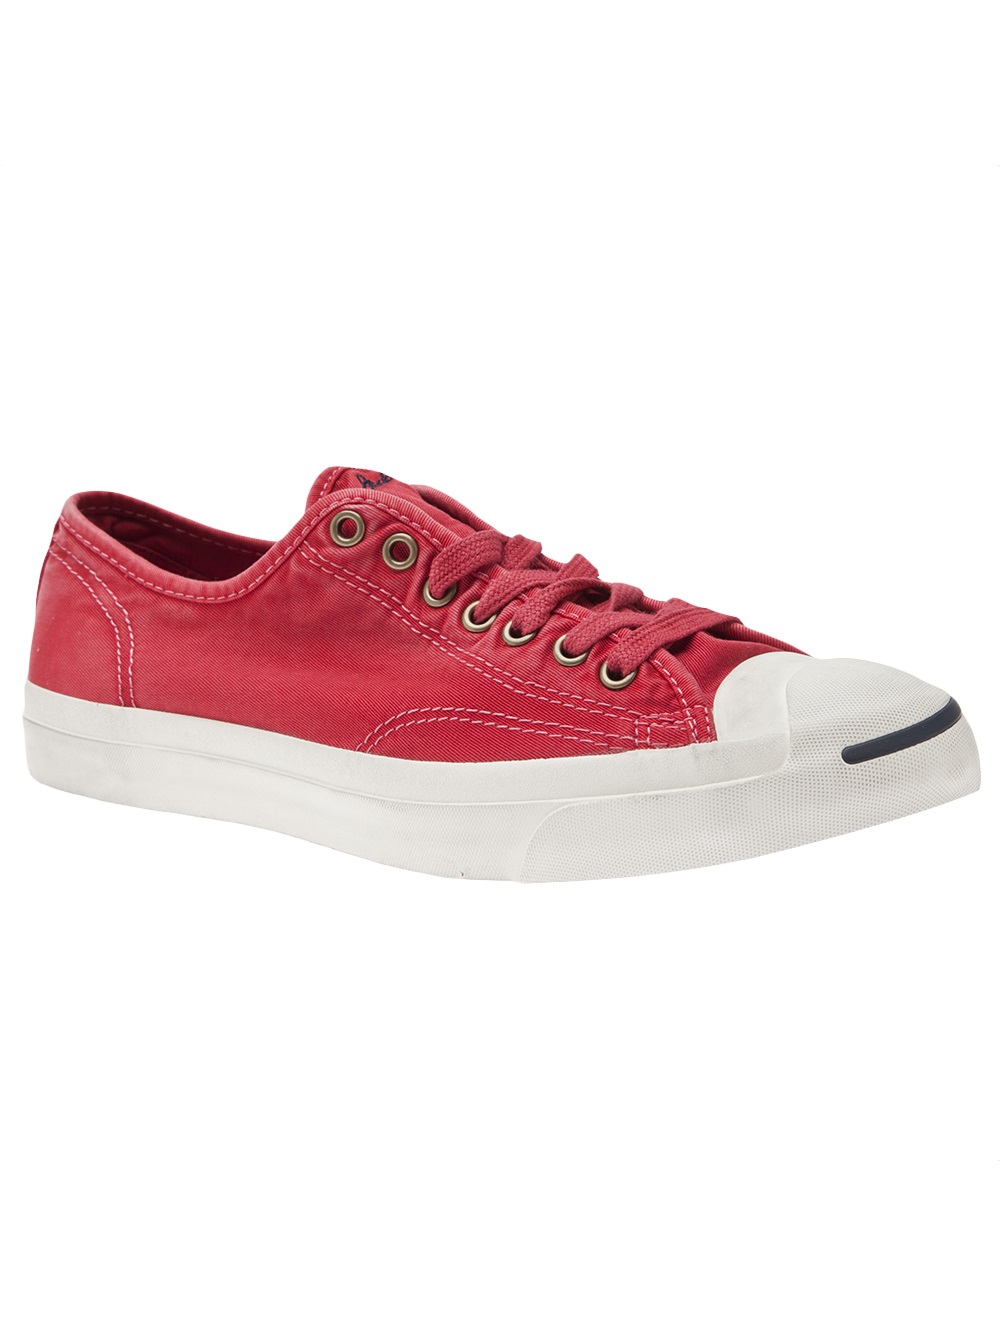 Converse Jack Purcell Sneaker in Red for Men | Lyst